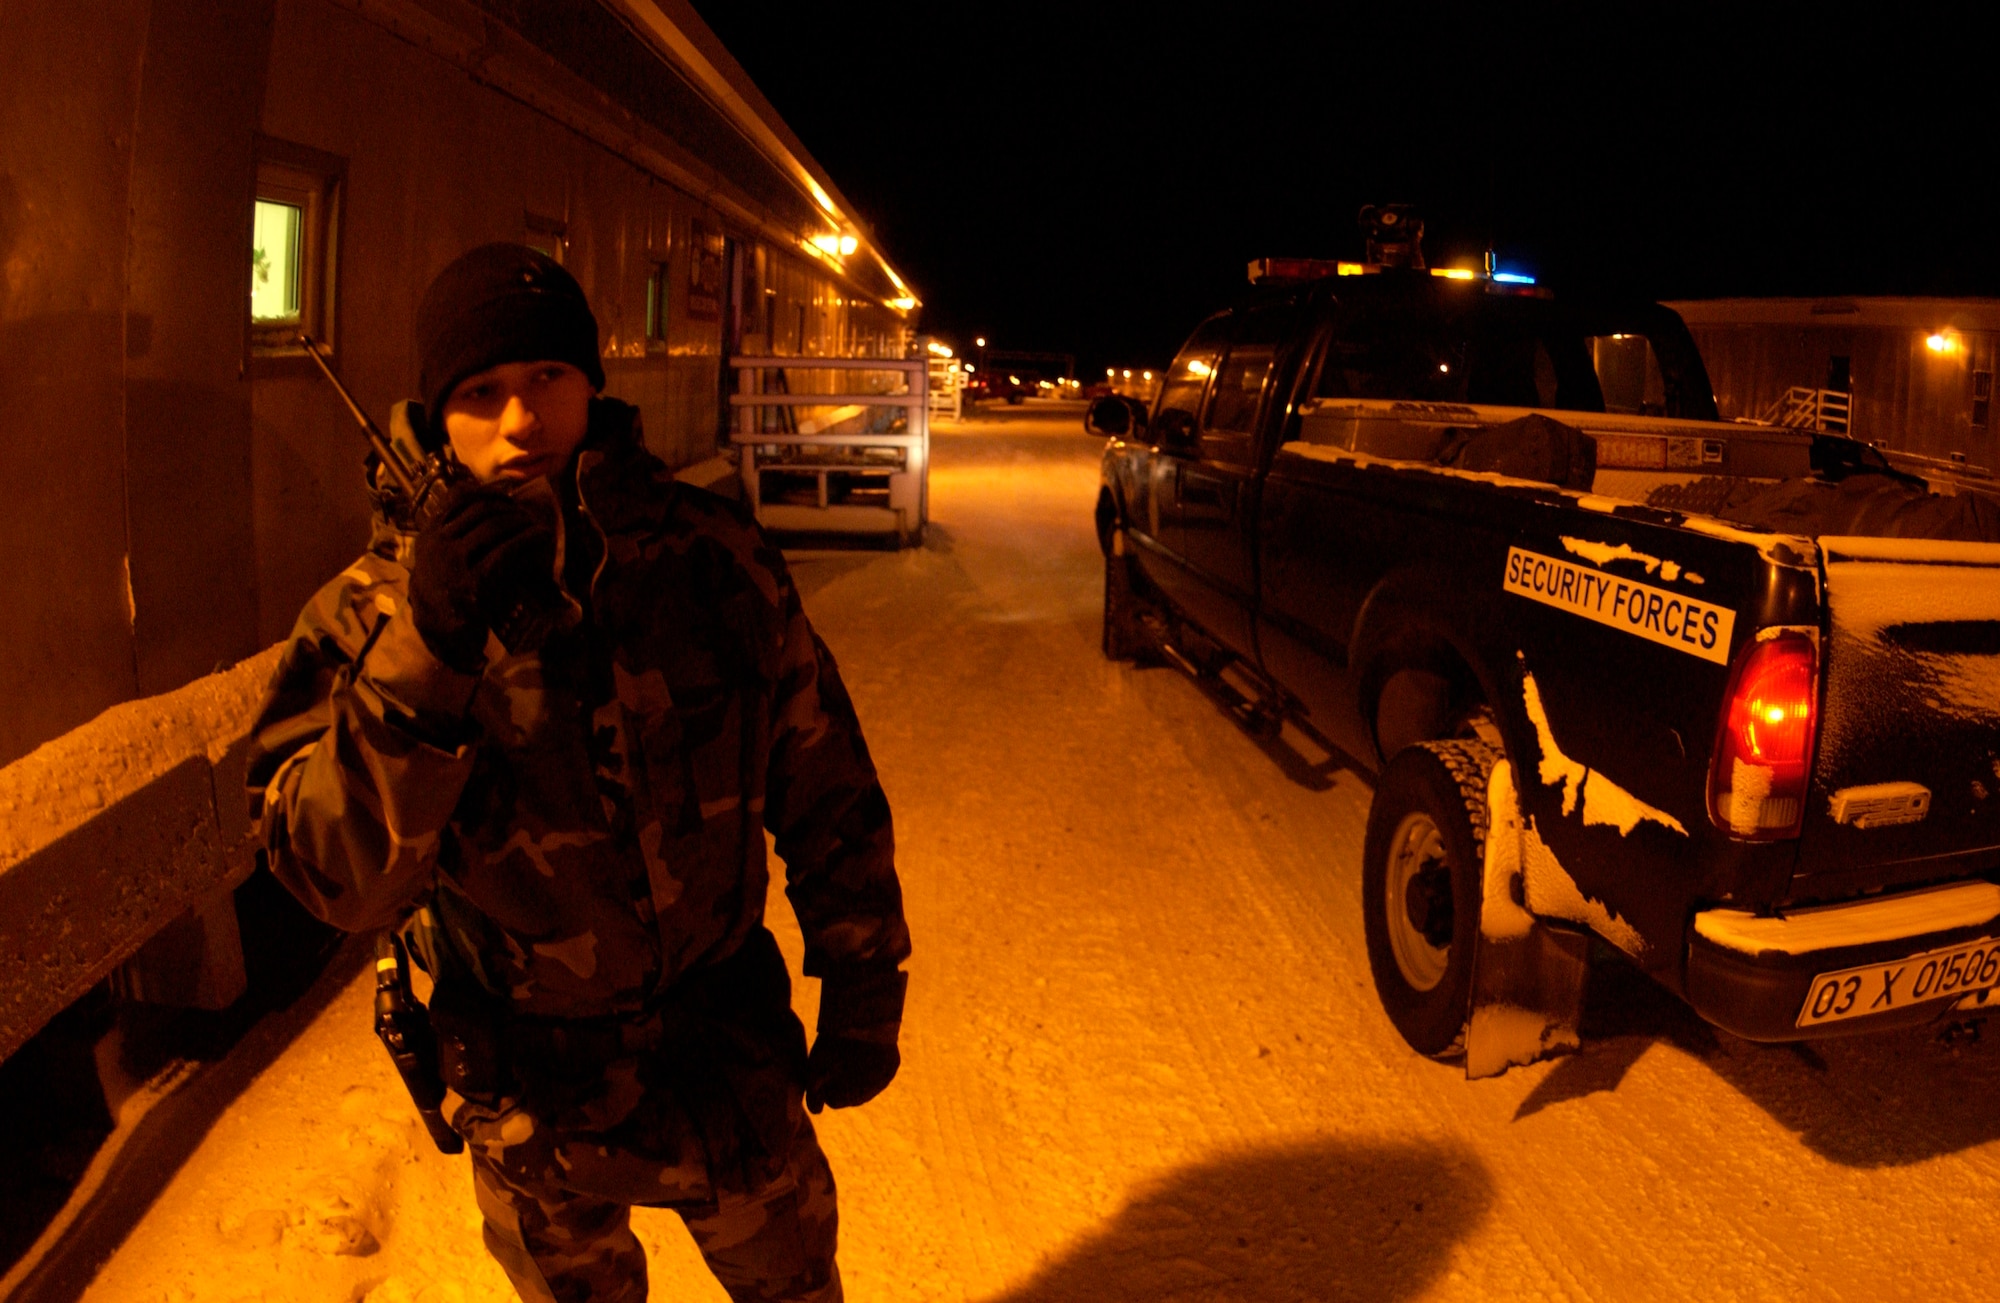 Airman Pedro Pita conducts a building security check as the temperature hovers close to zero Jan. 25 at Thule Air Base, Greenland. Airman Pita is a security forces member at Thule AB. Airmen serve a one-year remote, unaccompanied tour here in a multinational environment. (U.S. Air Force photo/Michael Tolzmann) 
